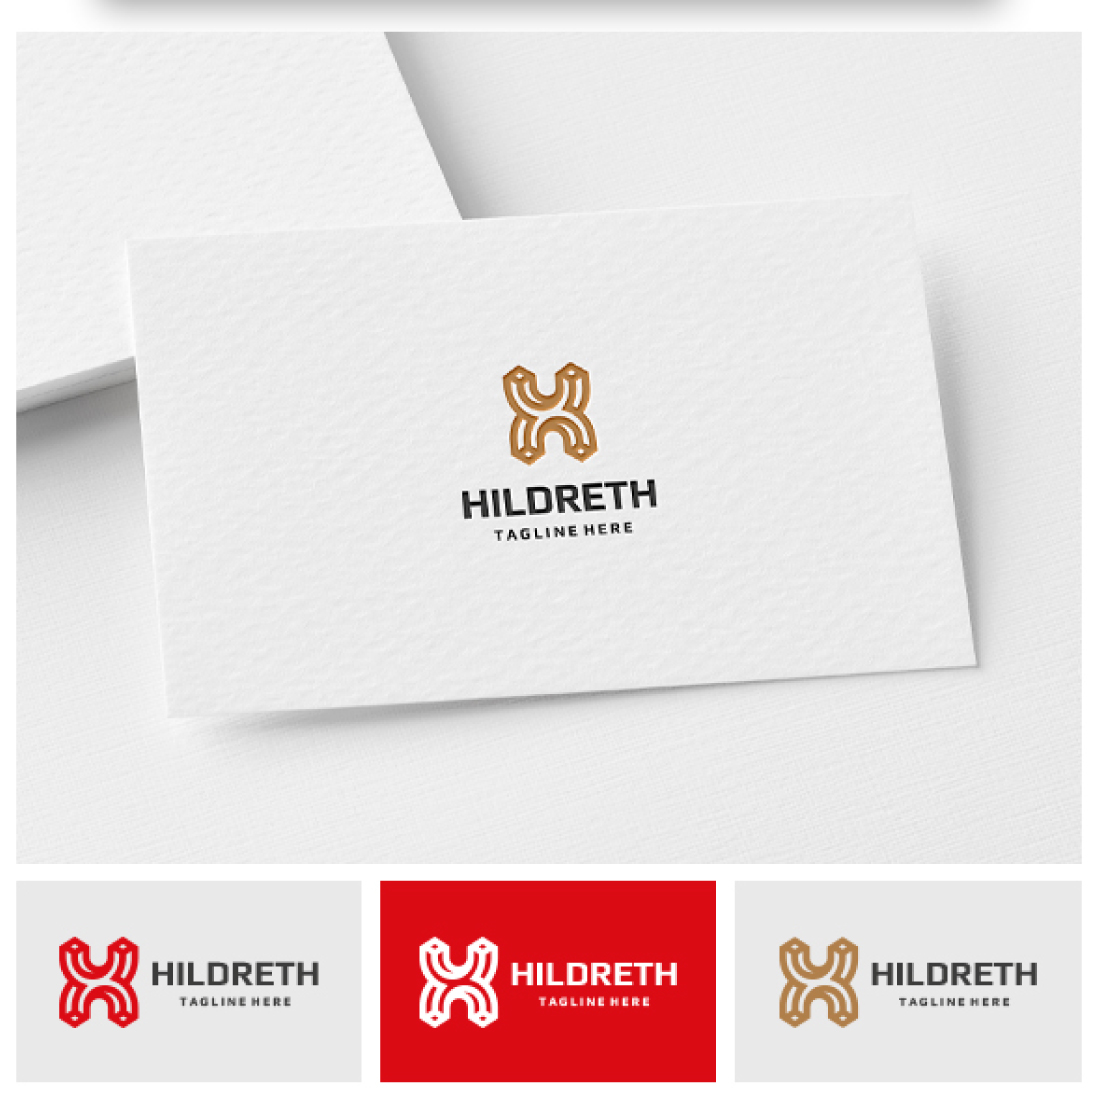 White business card with a gold and red logo.